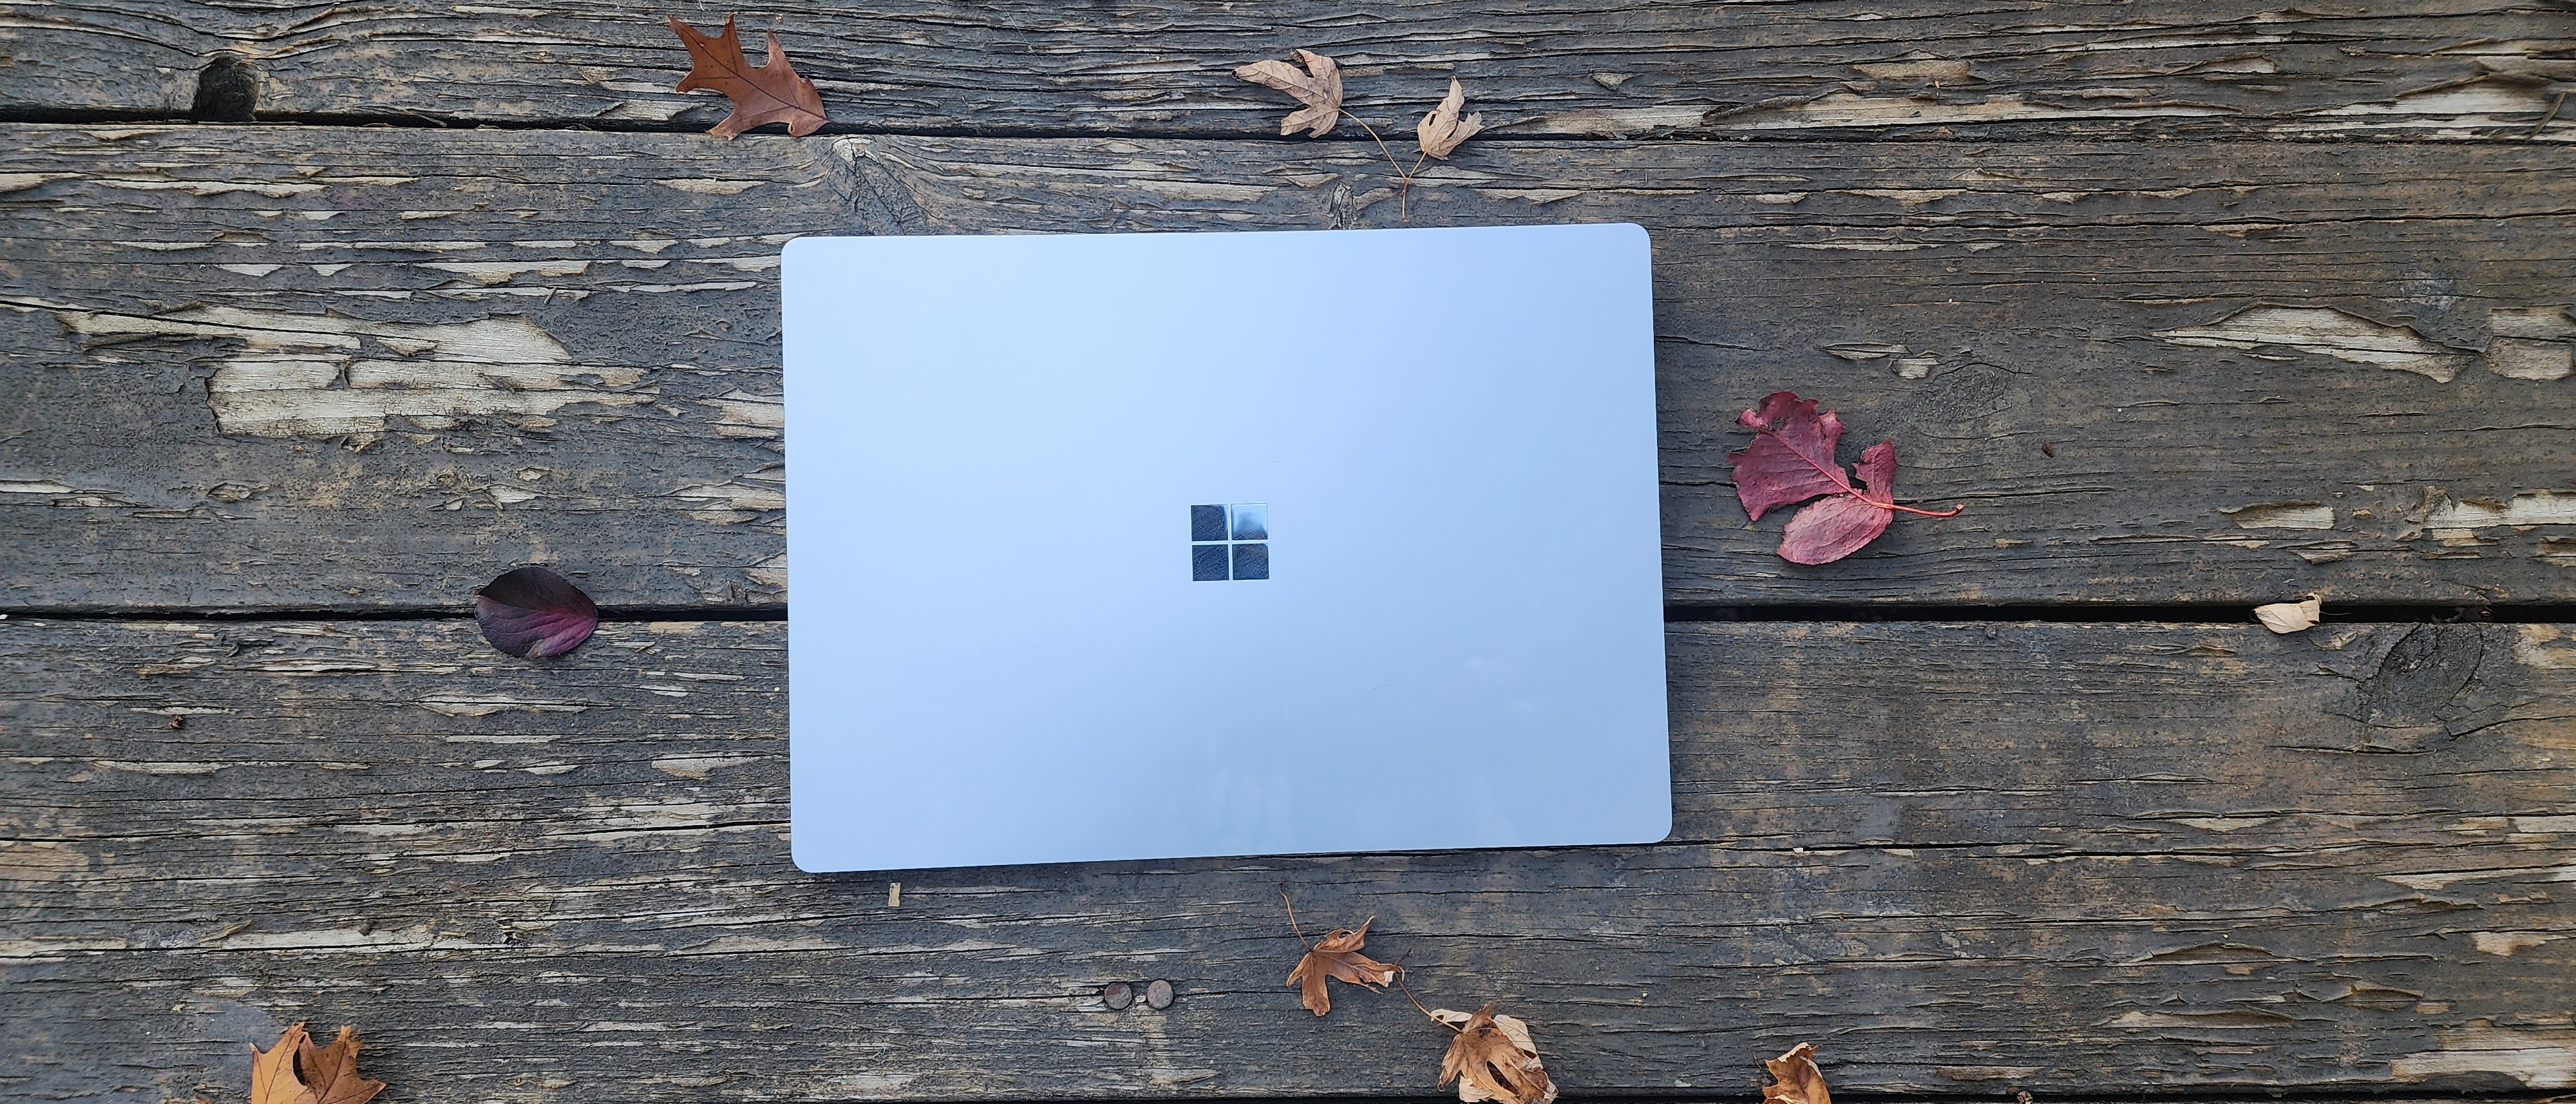 Microsoft's Surface Laptop 5 adds Thunderbolt, Intel's latest CPUs